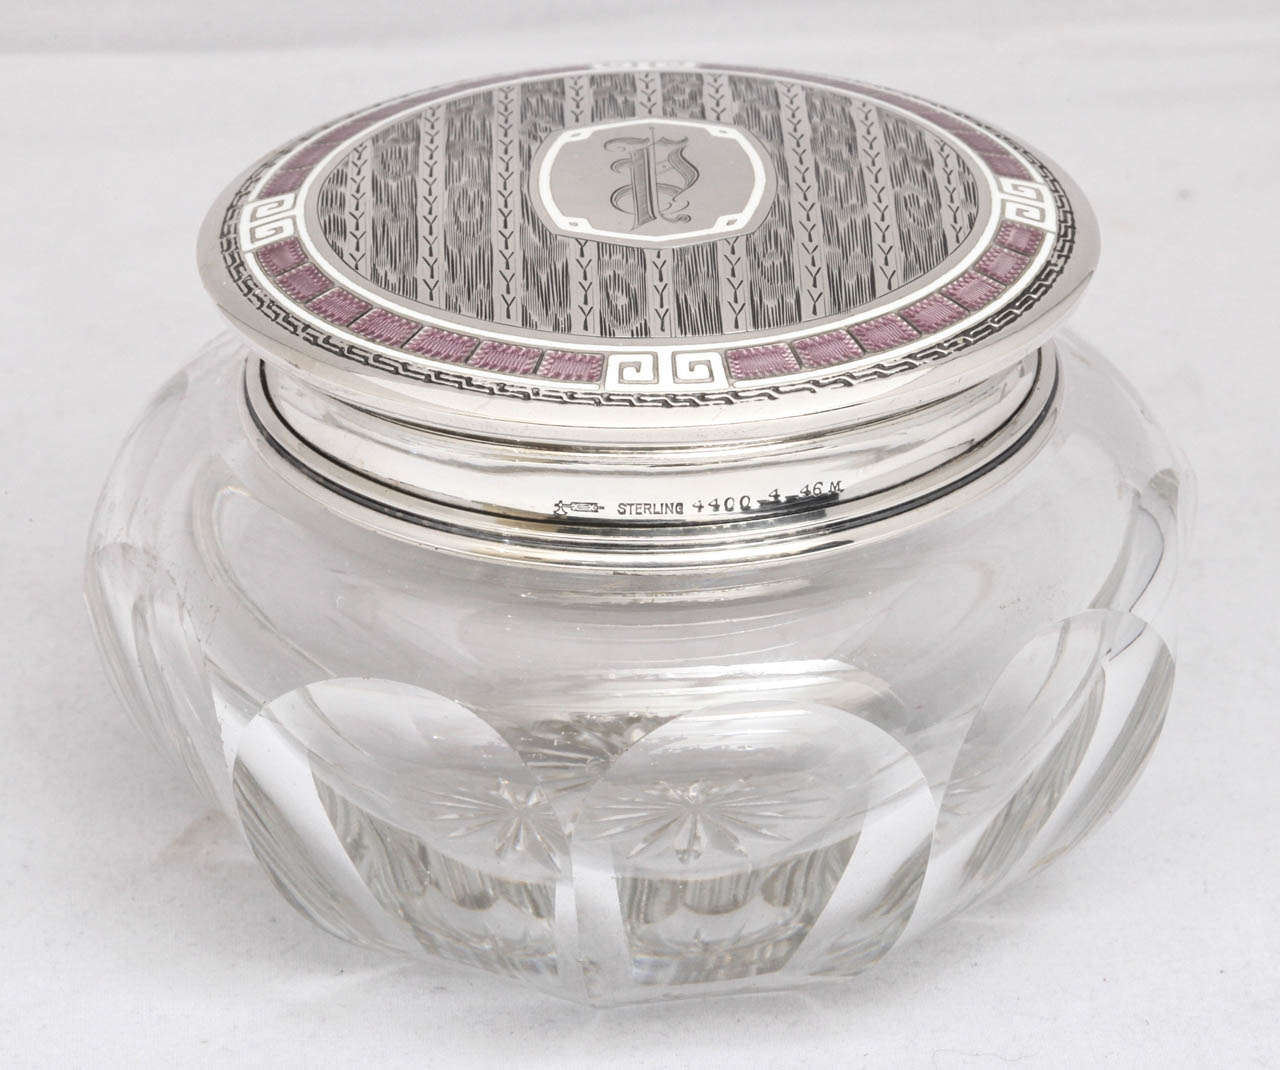 Unusual, Art Deco, panel cut crystal powder jar mounted by a sterling silver and light purple and white guilloche enamel lid, William B. Kerr & Co., New Jersey, Ca. 1920's - 1930's. Light purple guilloche enamel is bordered by white guilloche